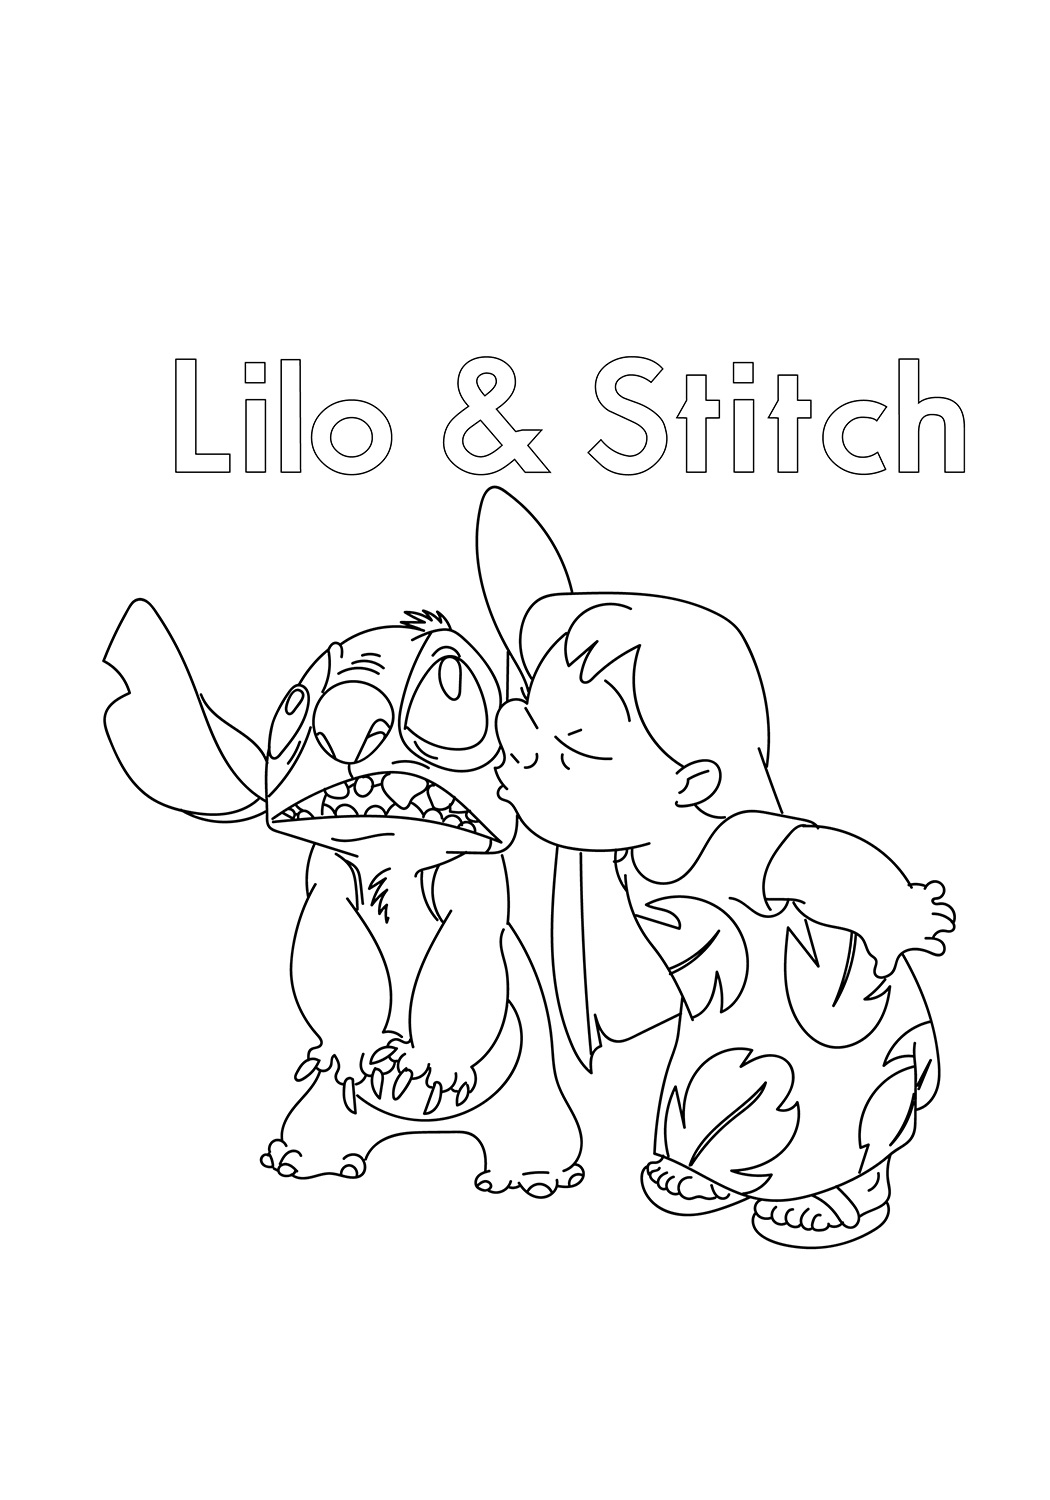 Lilo Kissing Sticth Coloring Page - Free Printable Coloring Pages for Kids